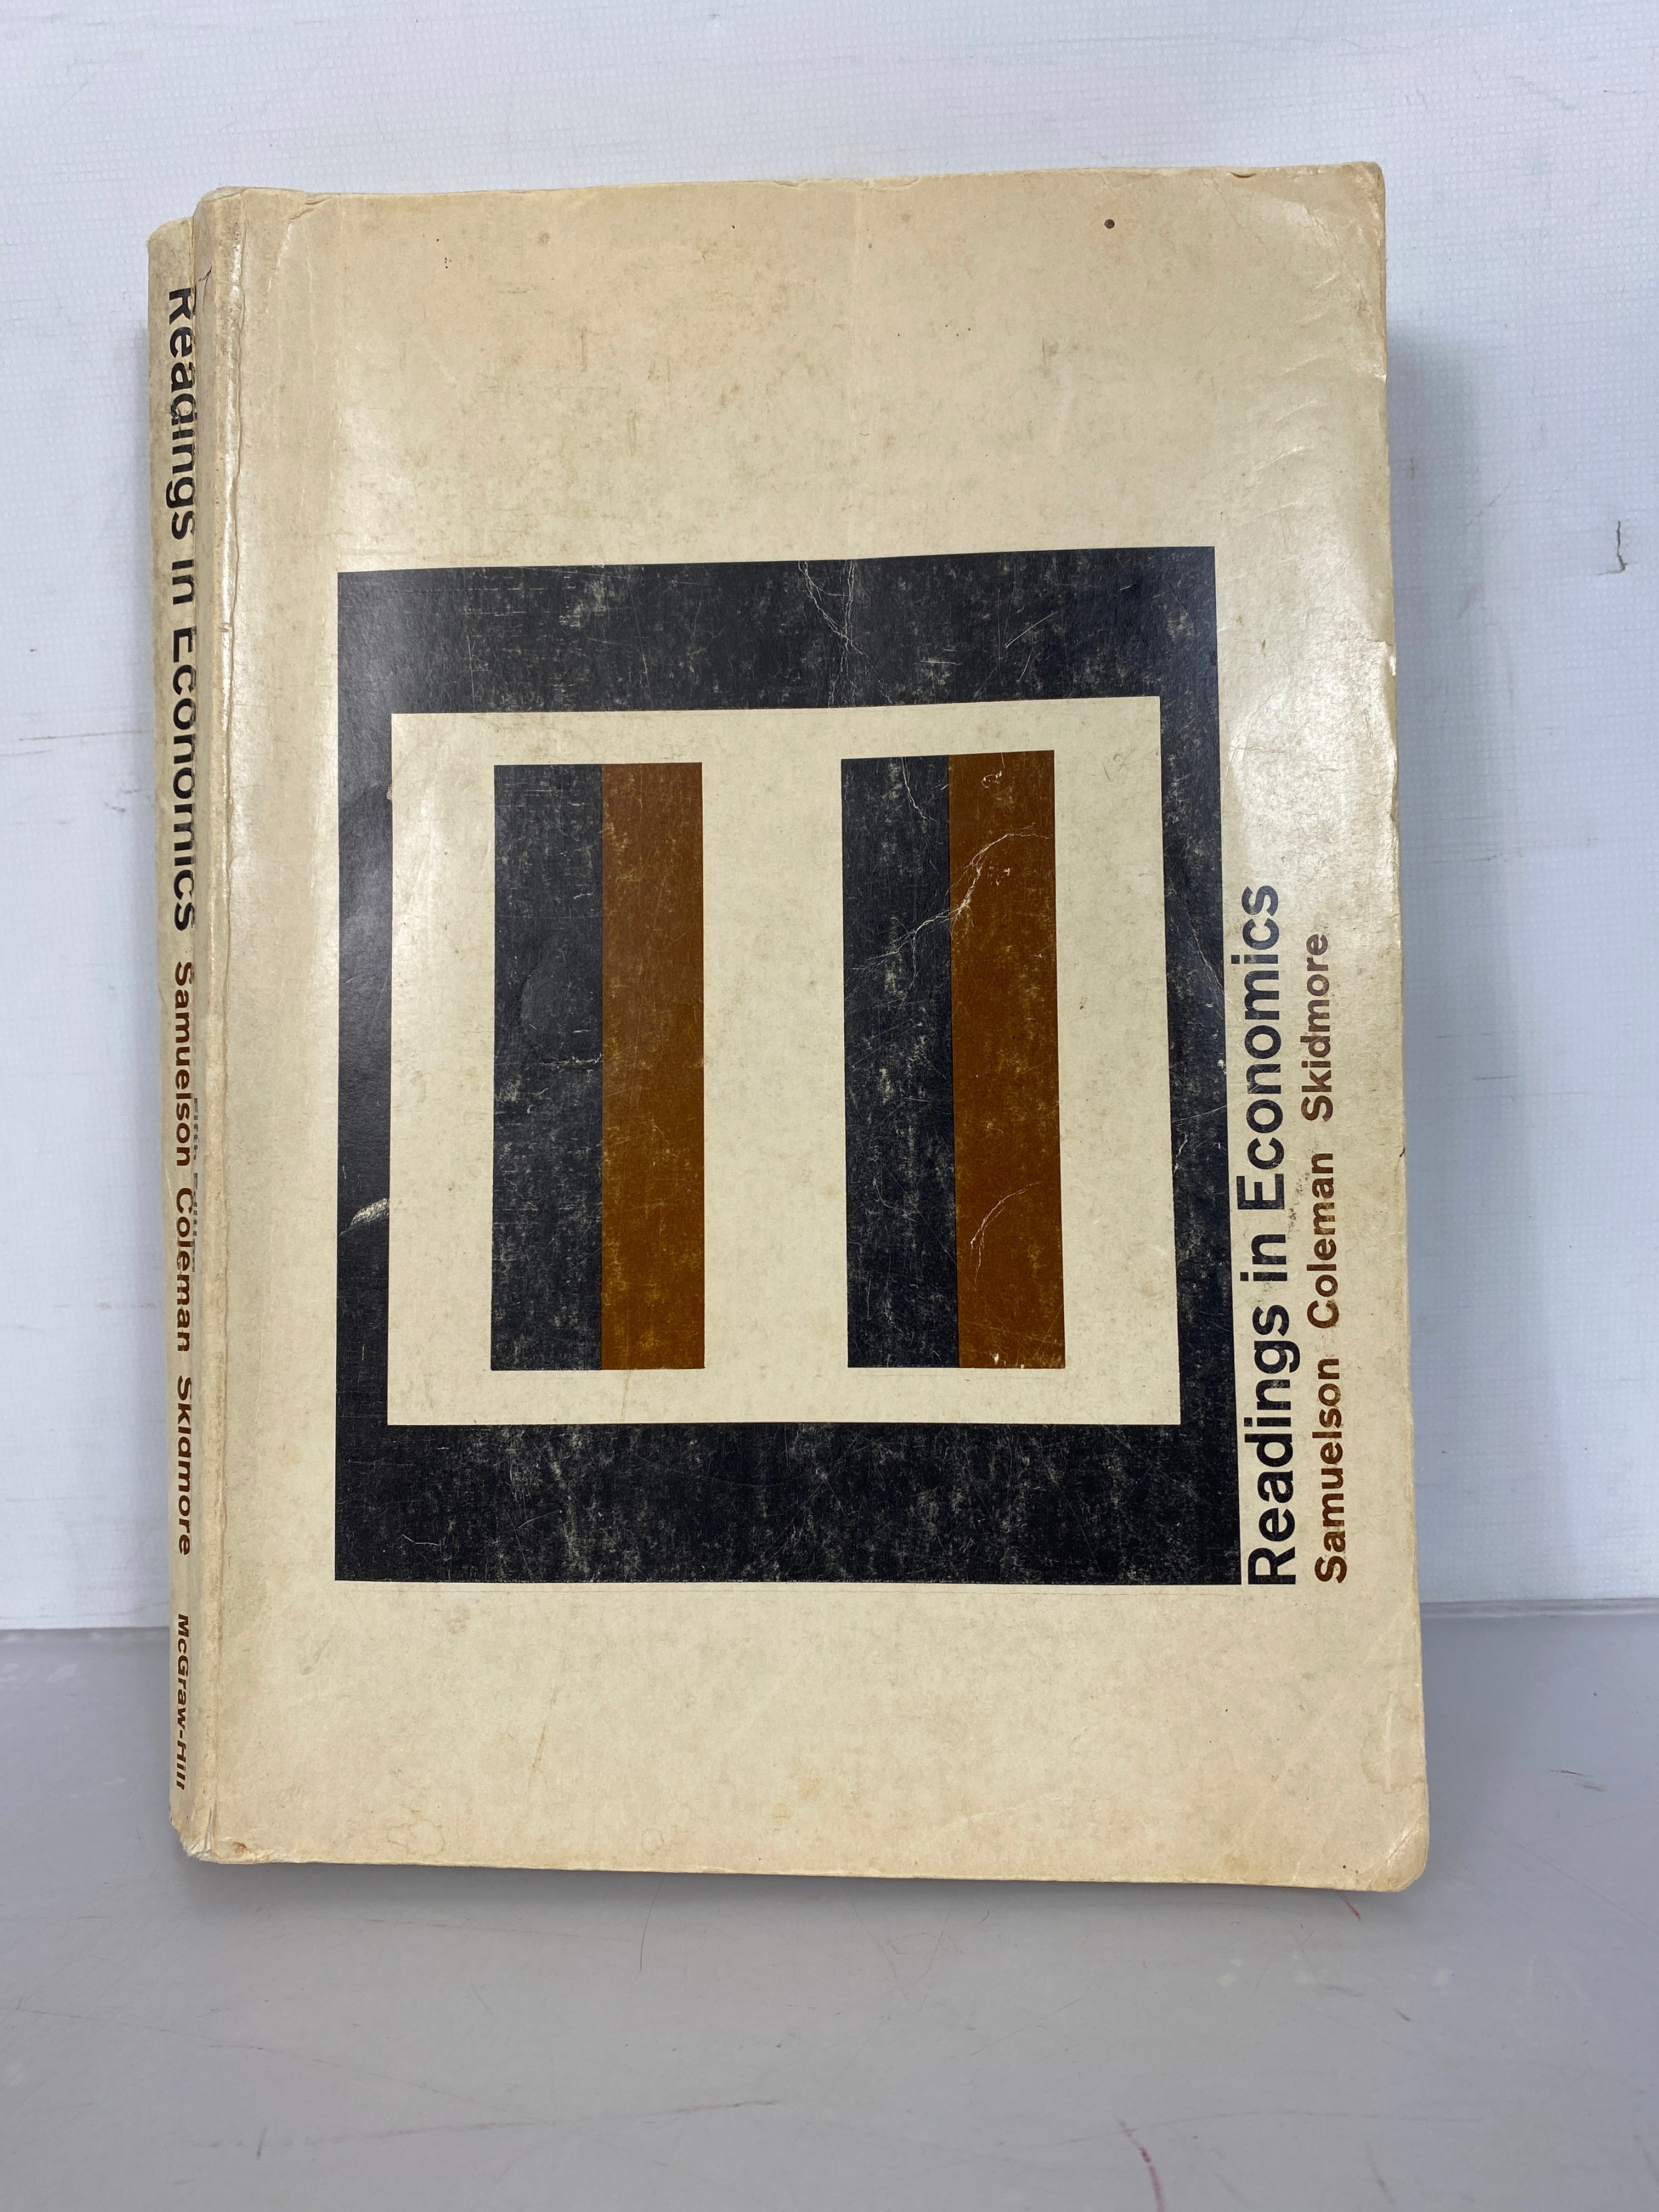 Readings in Economics Fifth Edition Samuelson, Coleman, and Skidmore 1967 SC